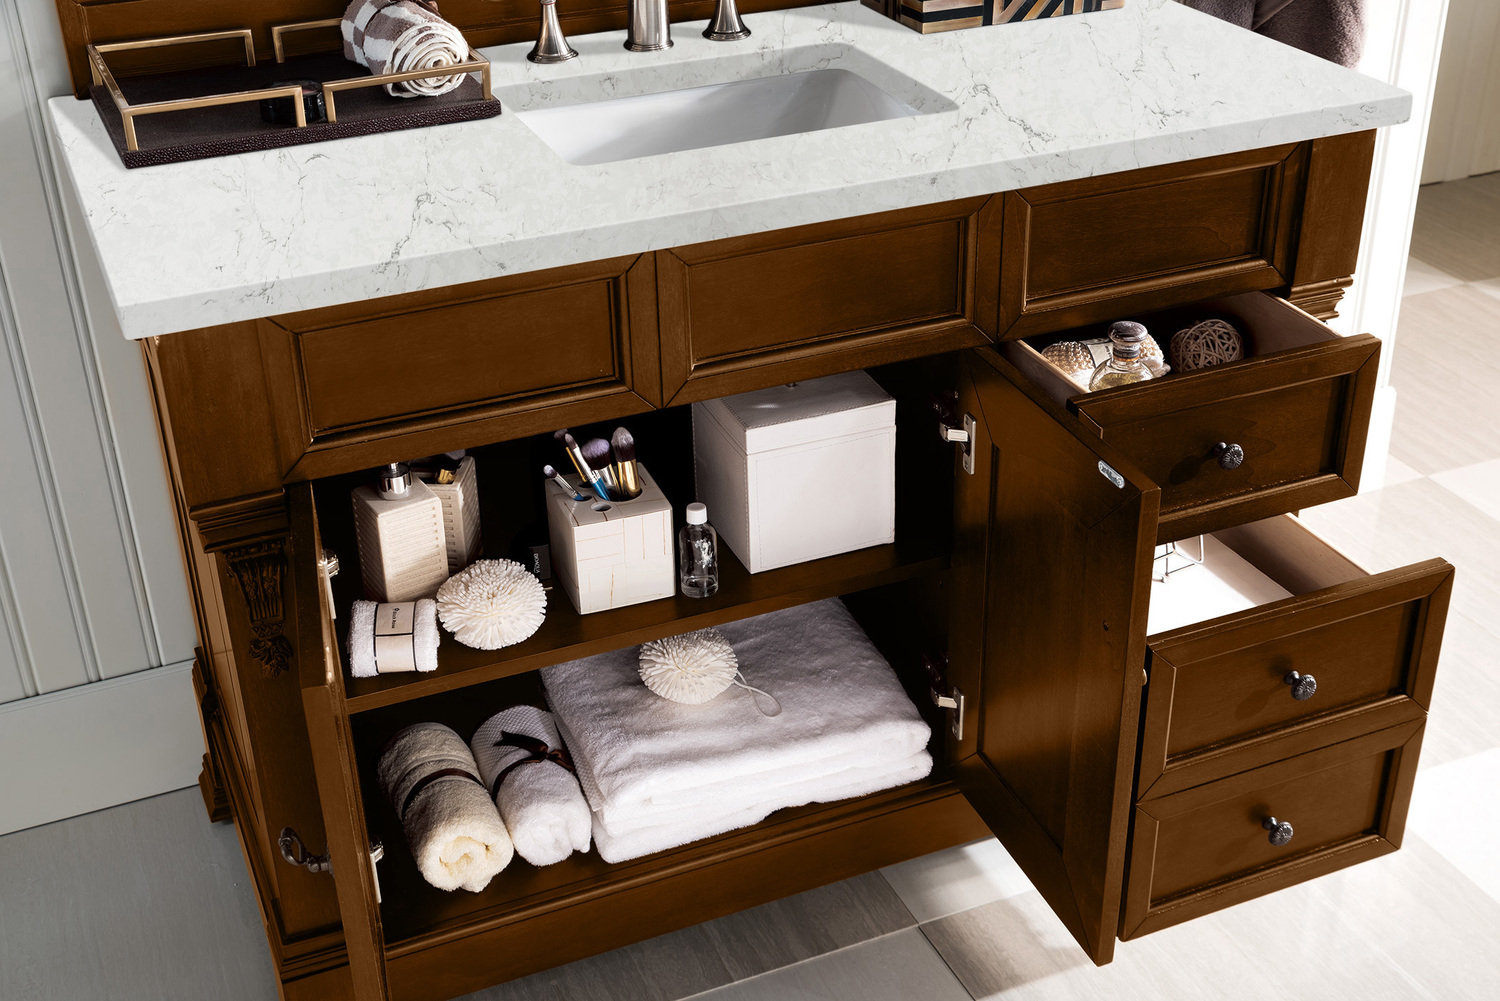 used bathroom cabinets   James Martin Vanity Country Oak Transitional